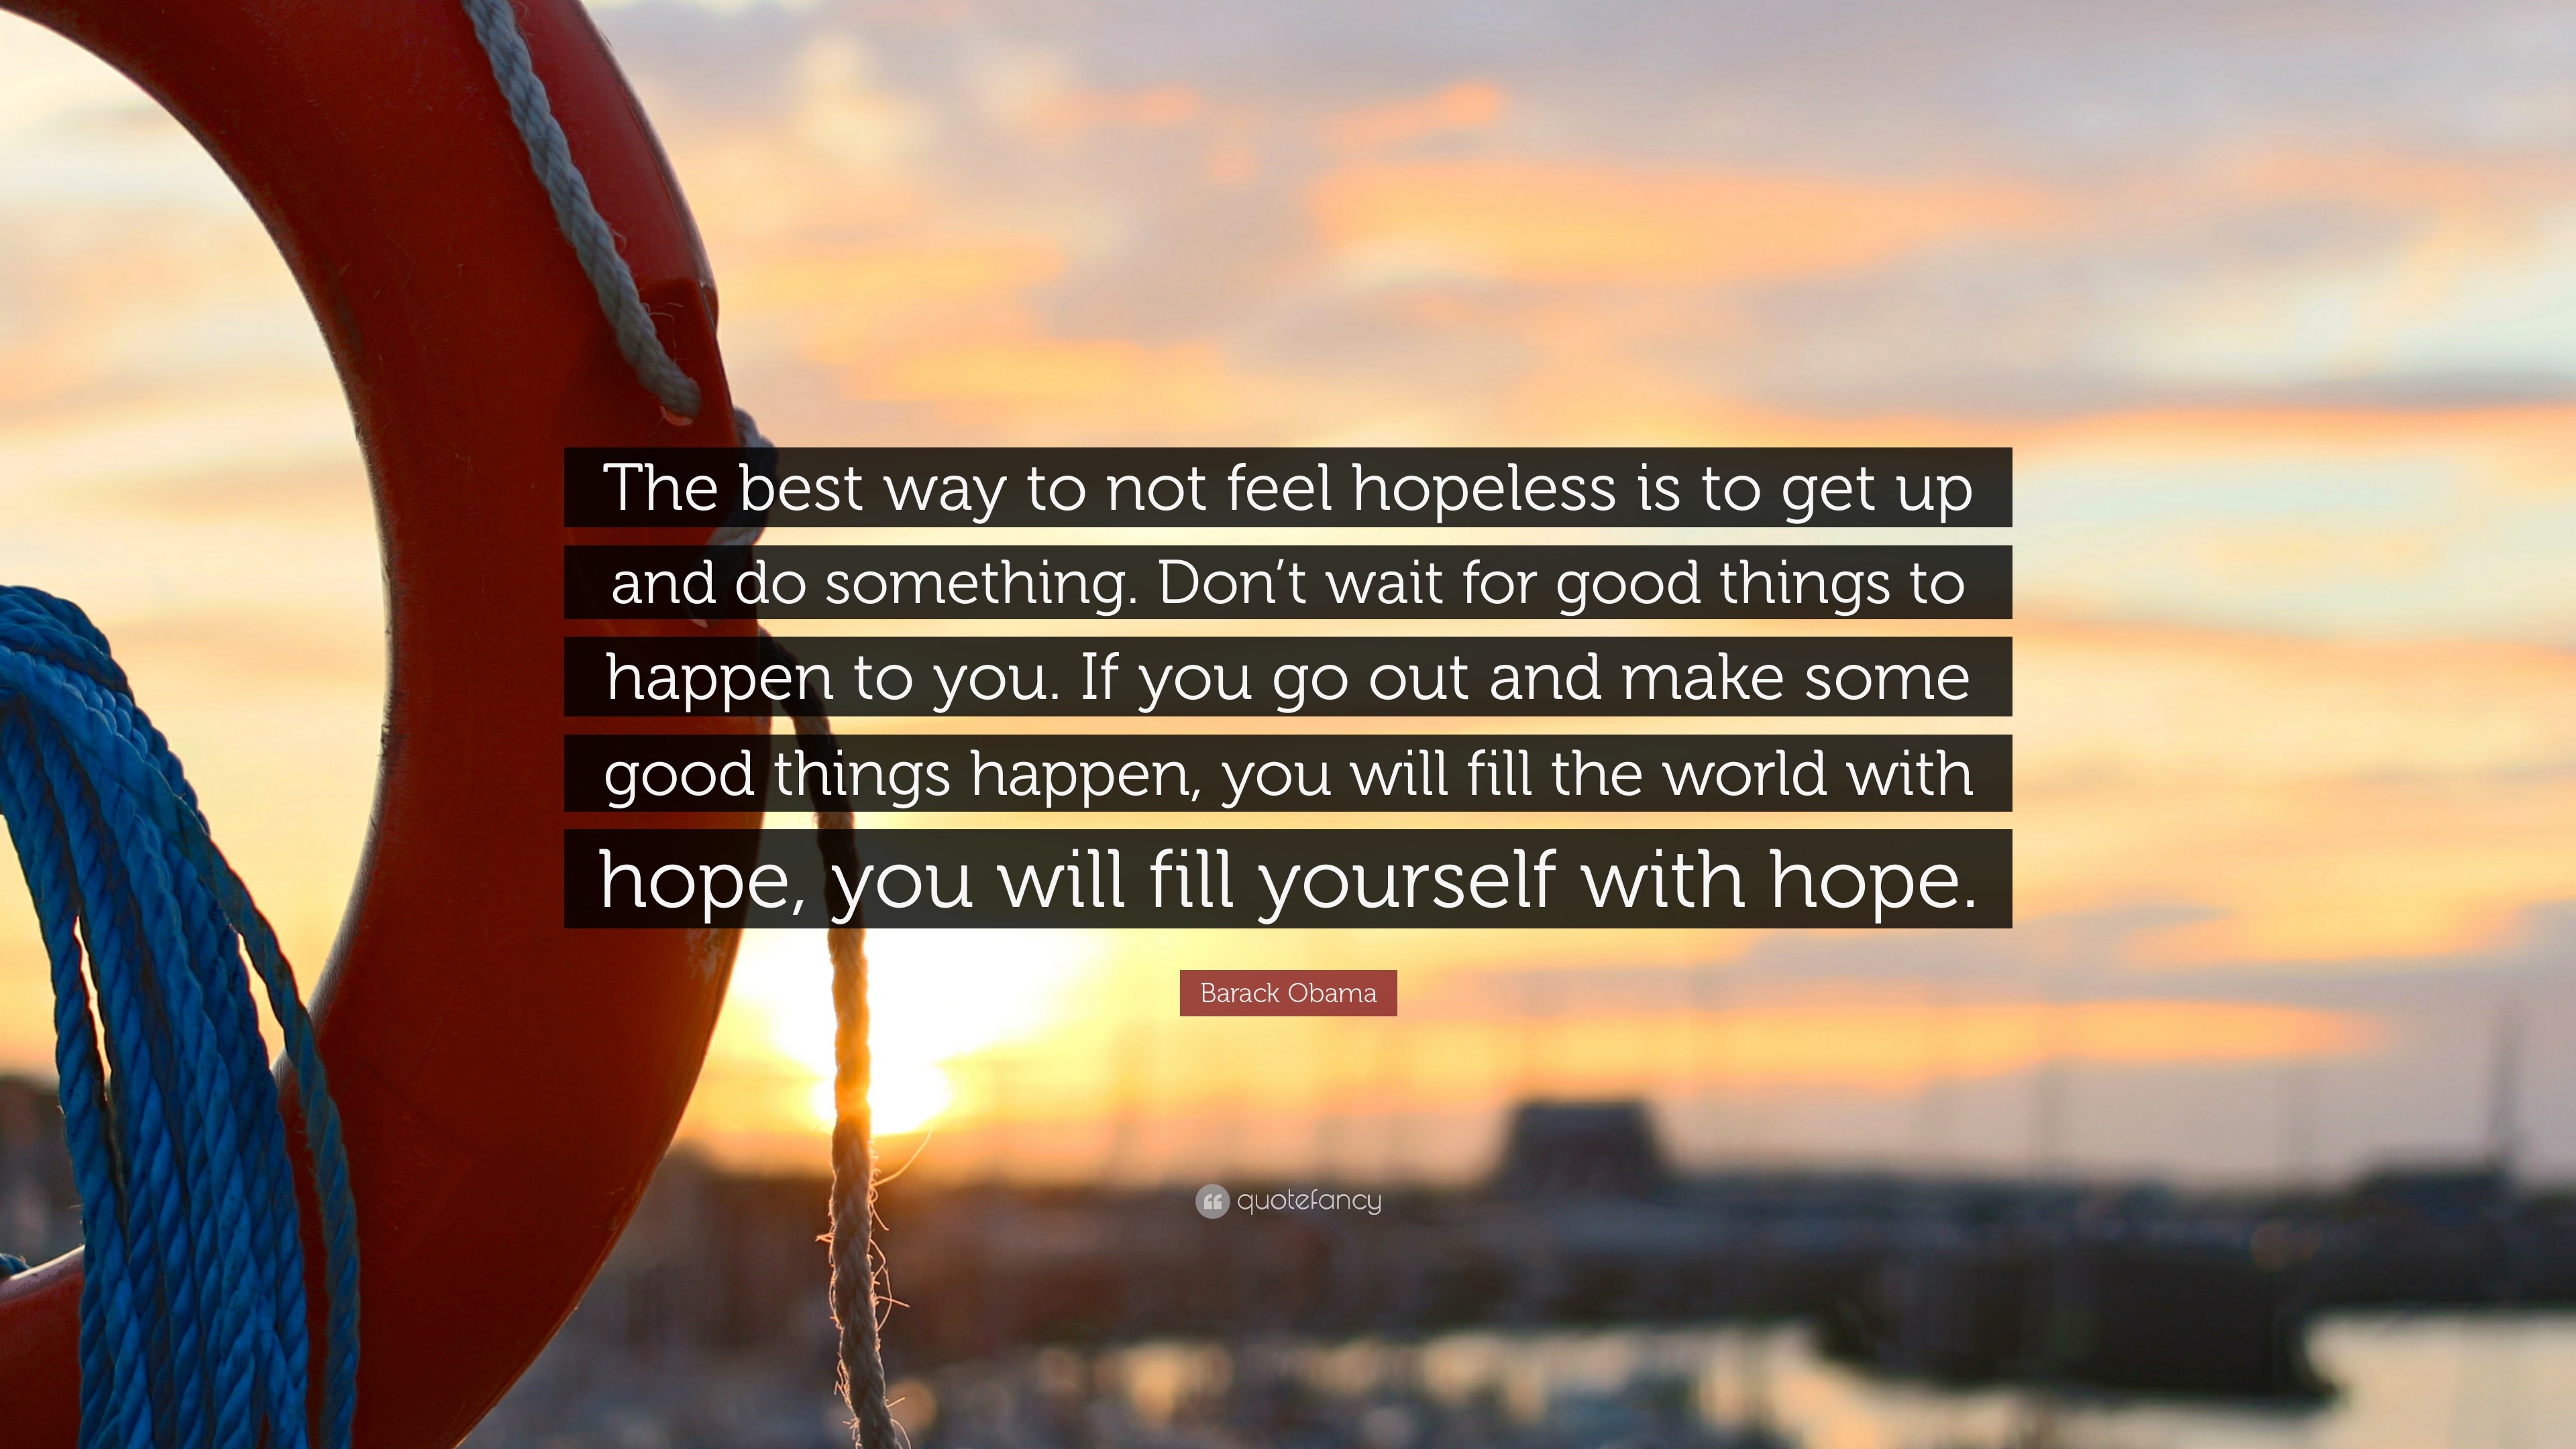 Barack Obama Quote: “The best way to not feel hopeless is to get up and